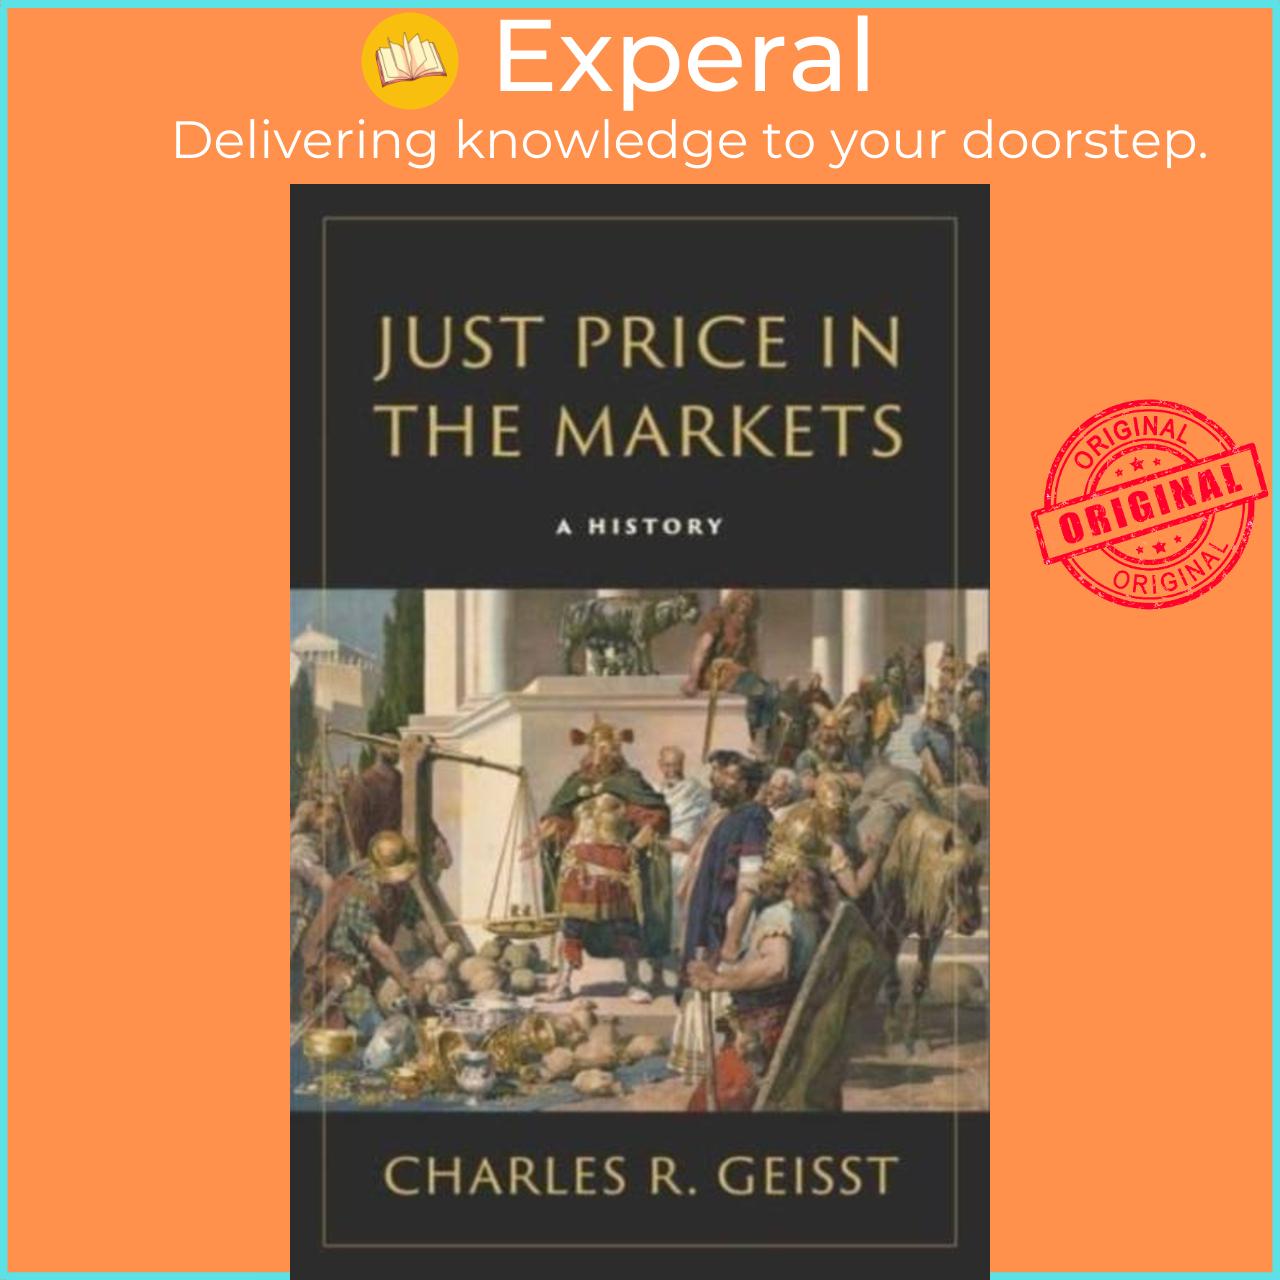 Sách - Just Price in the Markets - A History by Charles R. Geisst (UK edition, hardcover)